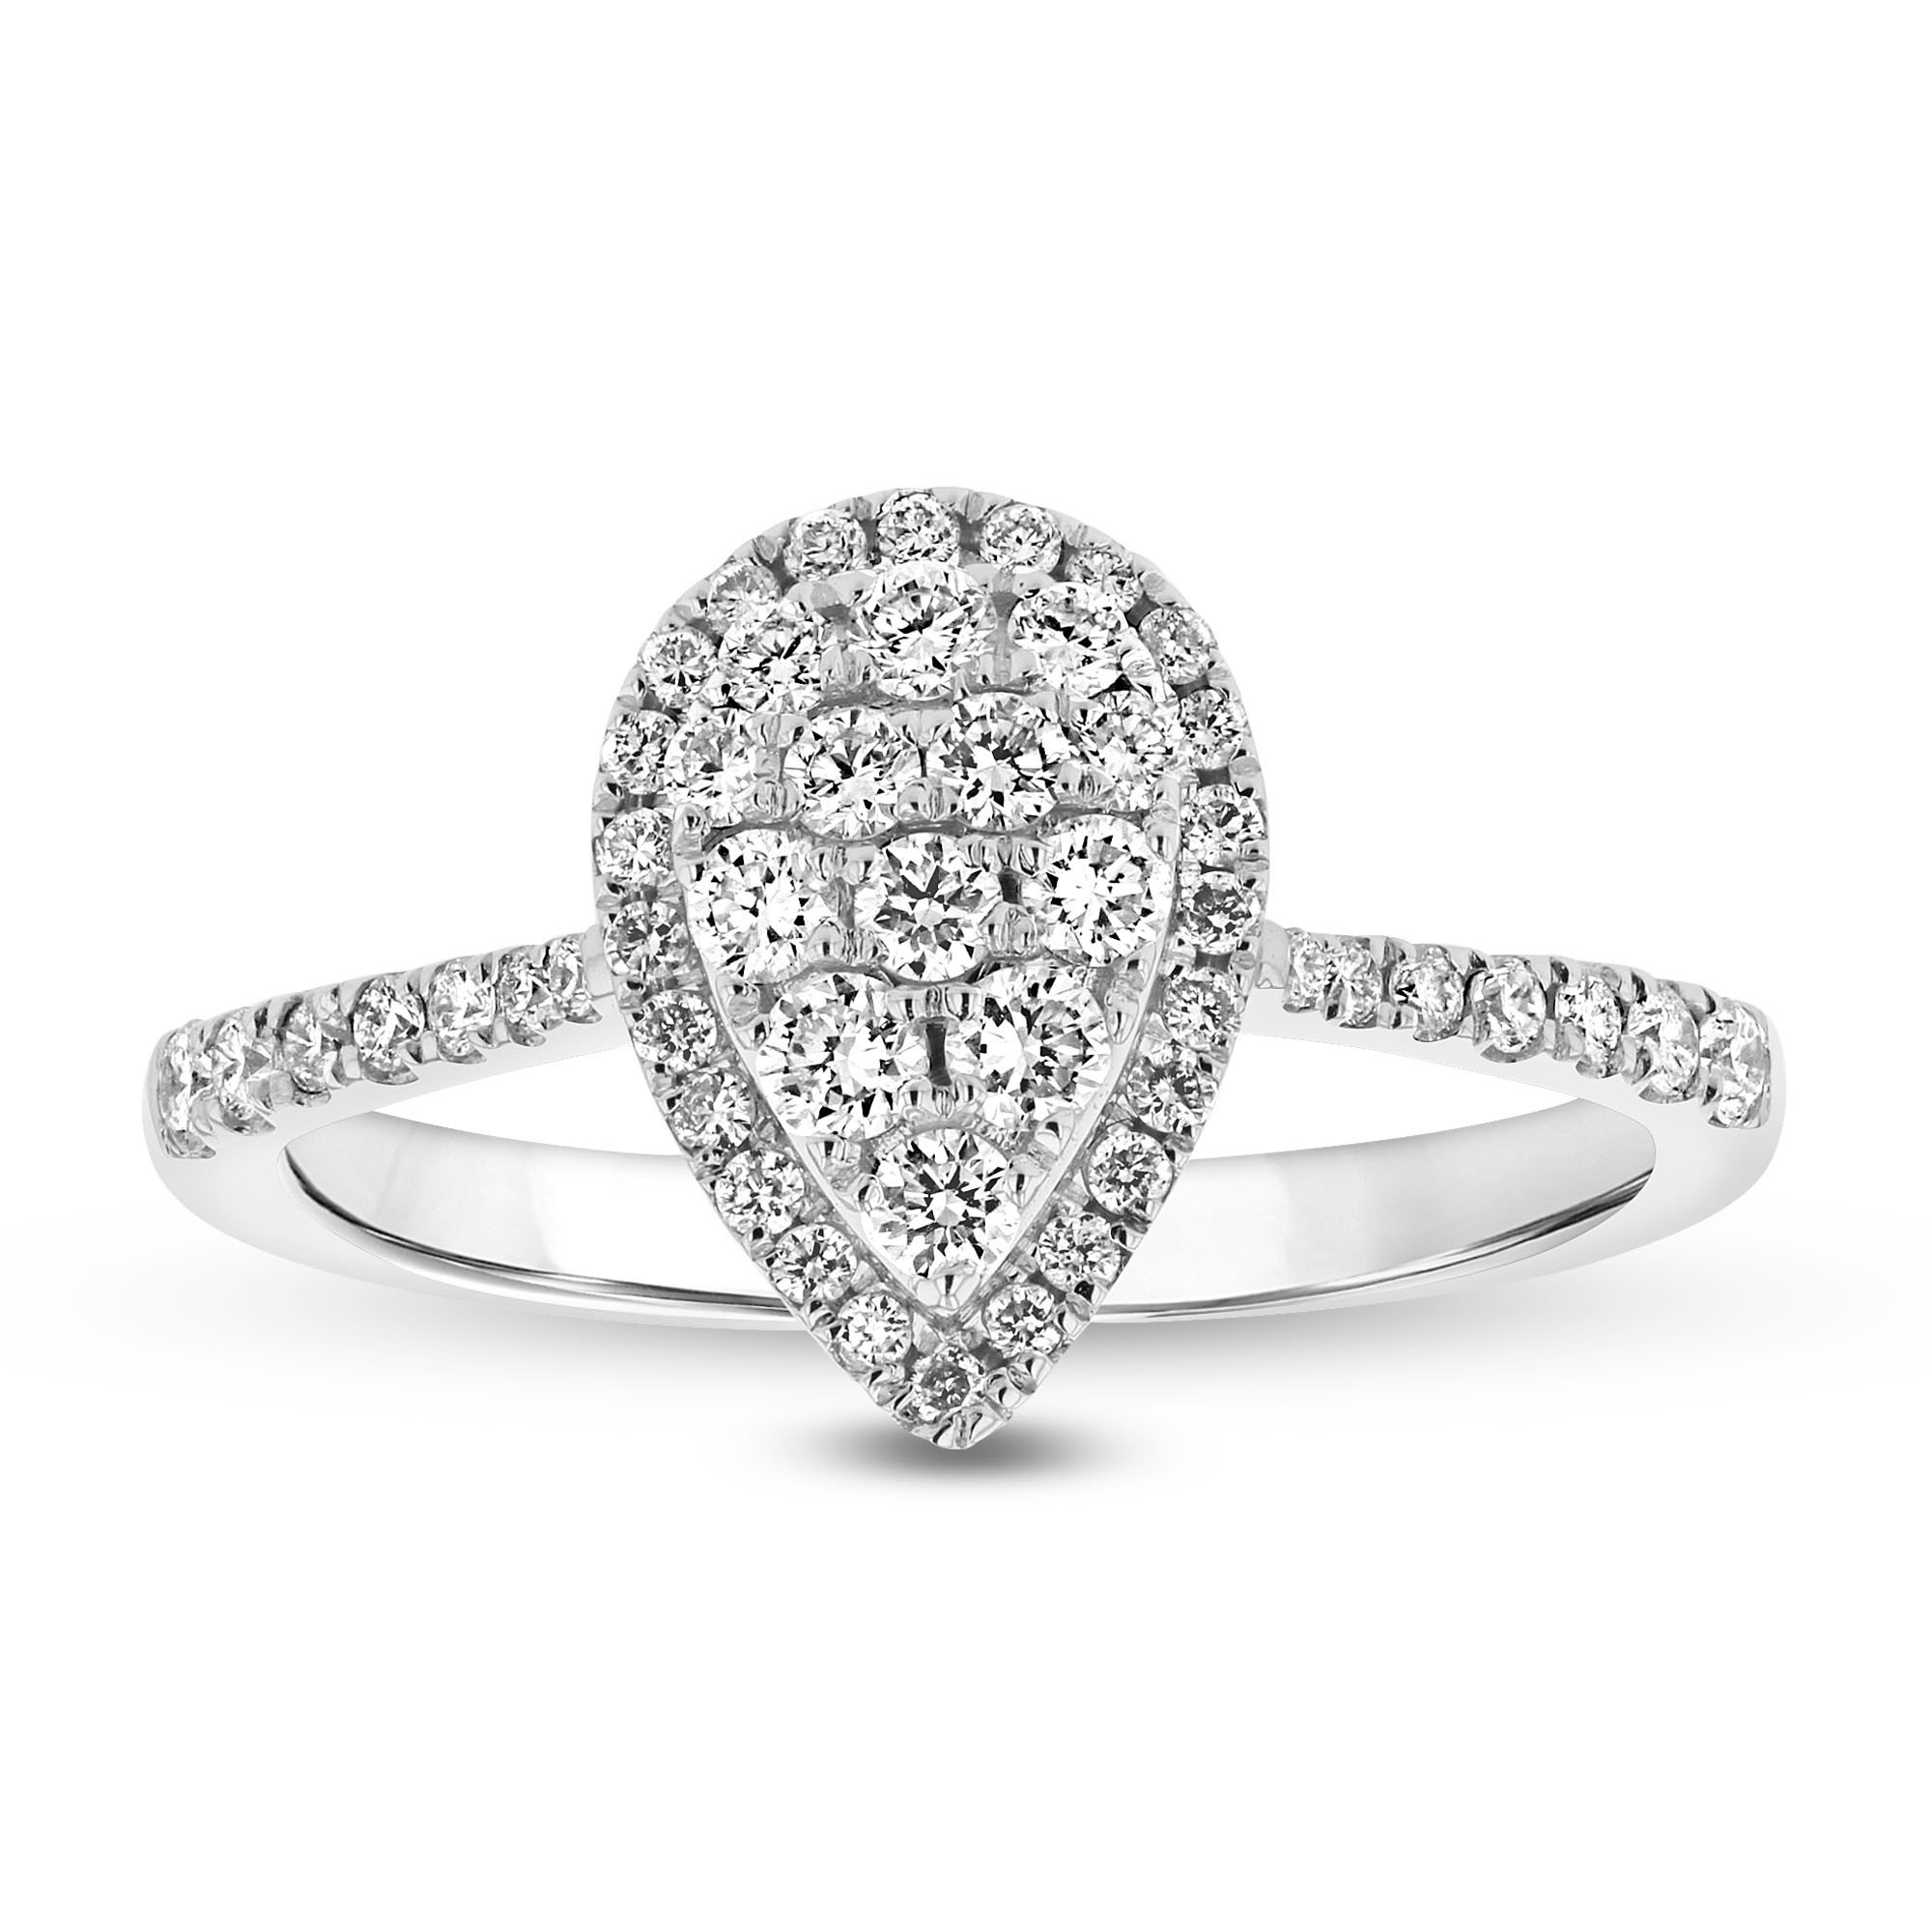 View 0.60ctw Diamond Pear Shaped Cluster Ring in 18k White Gold